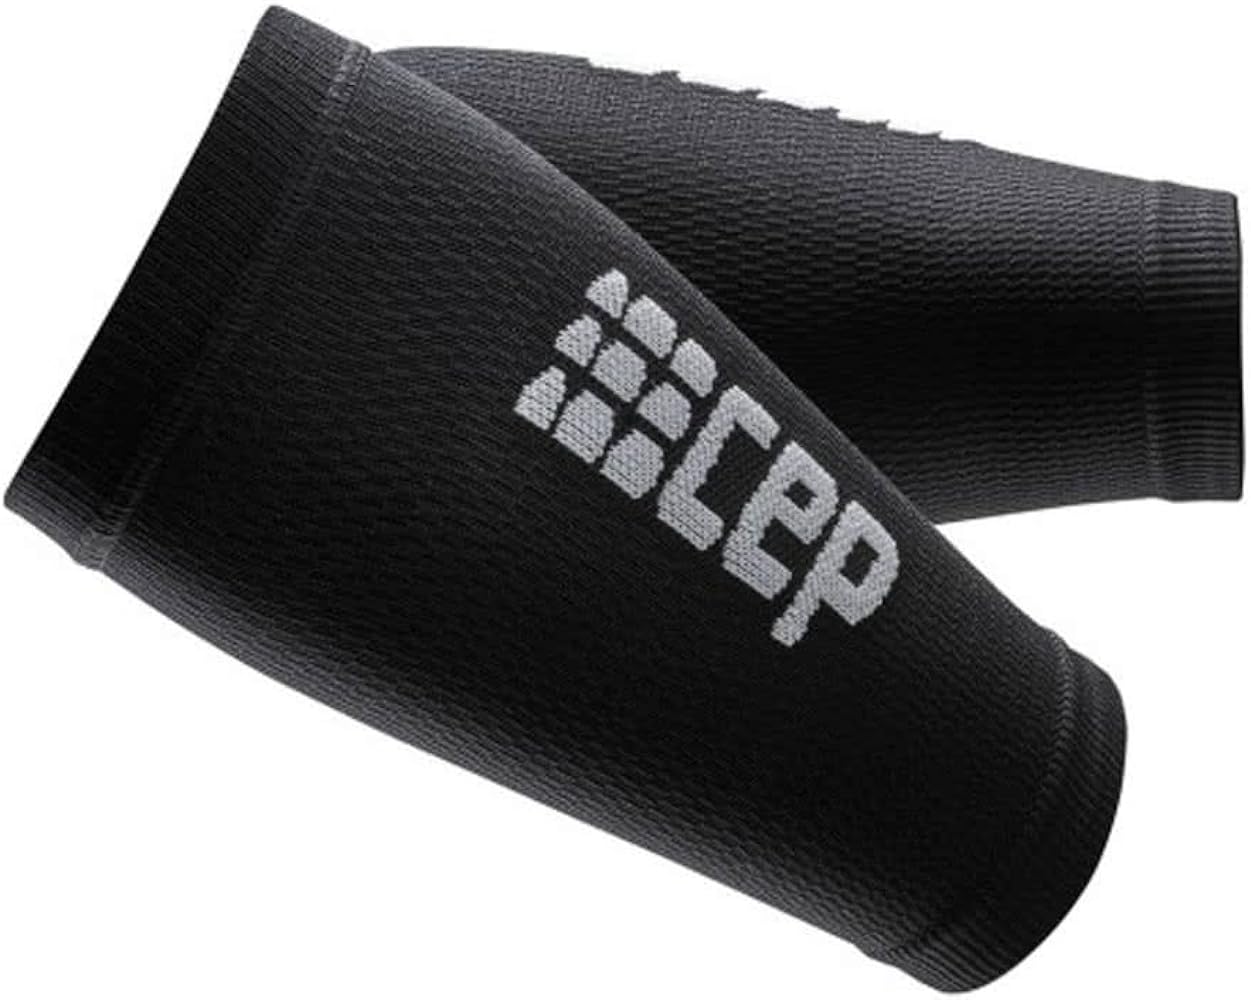 CEP Forearm Support Compression Sleeves Review